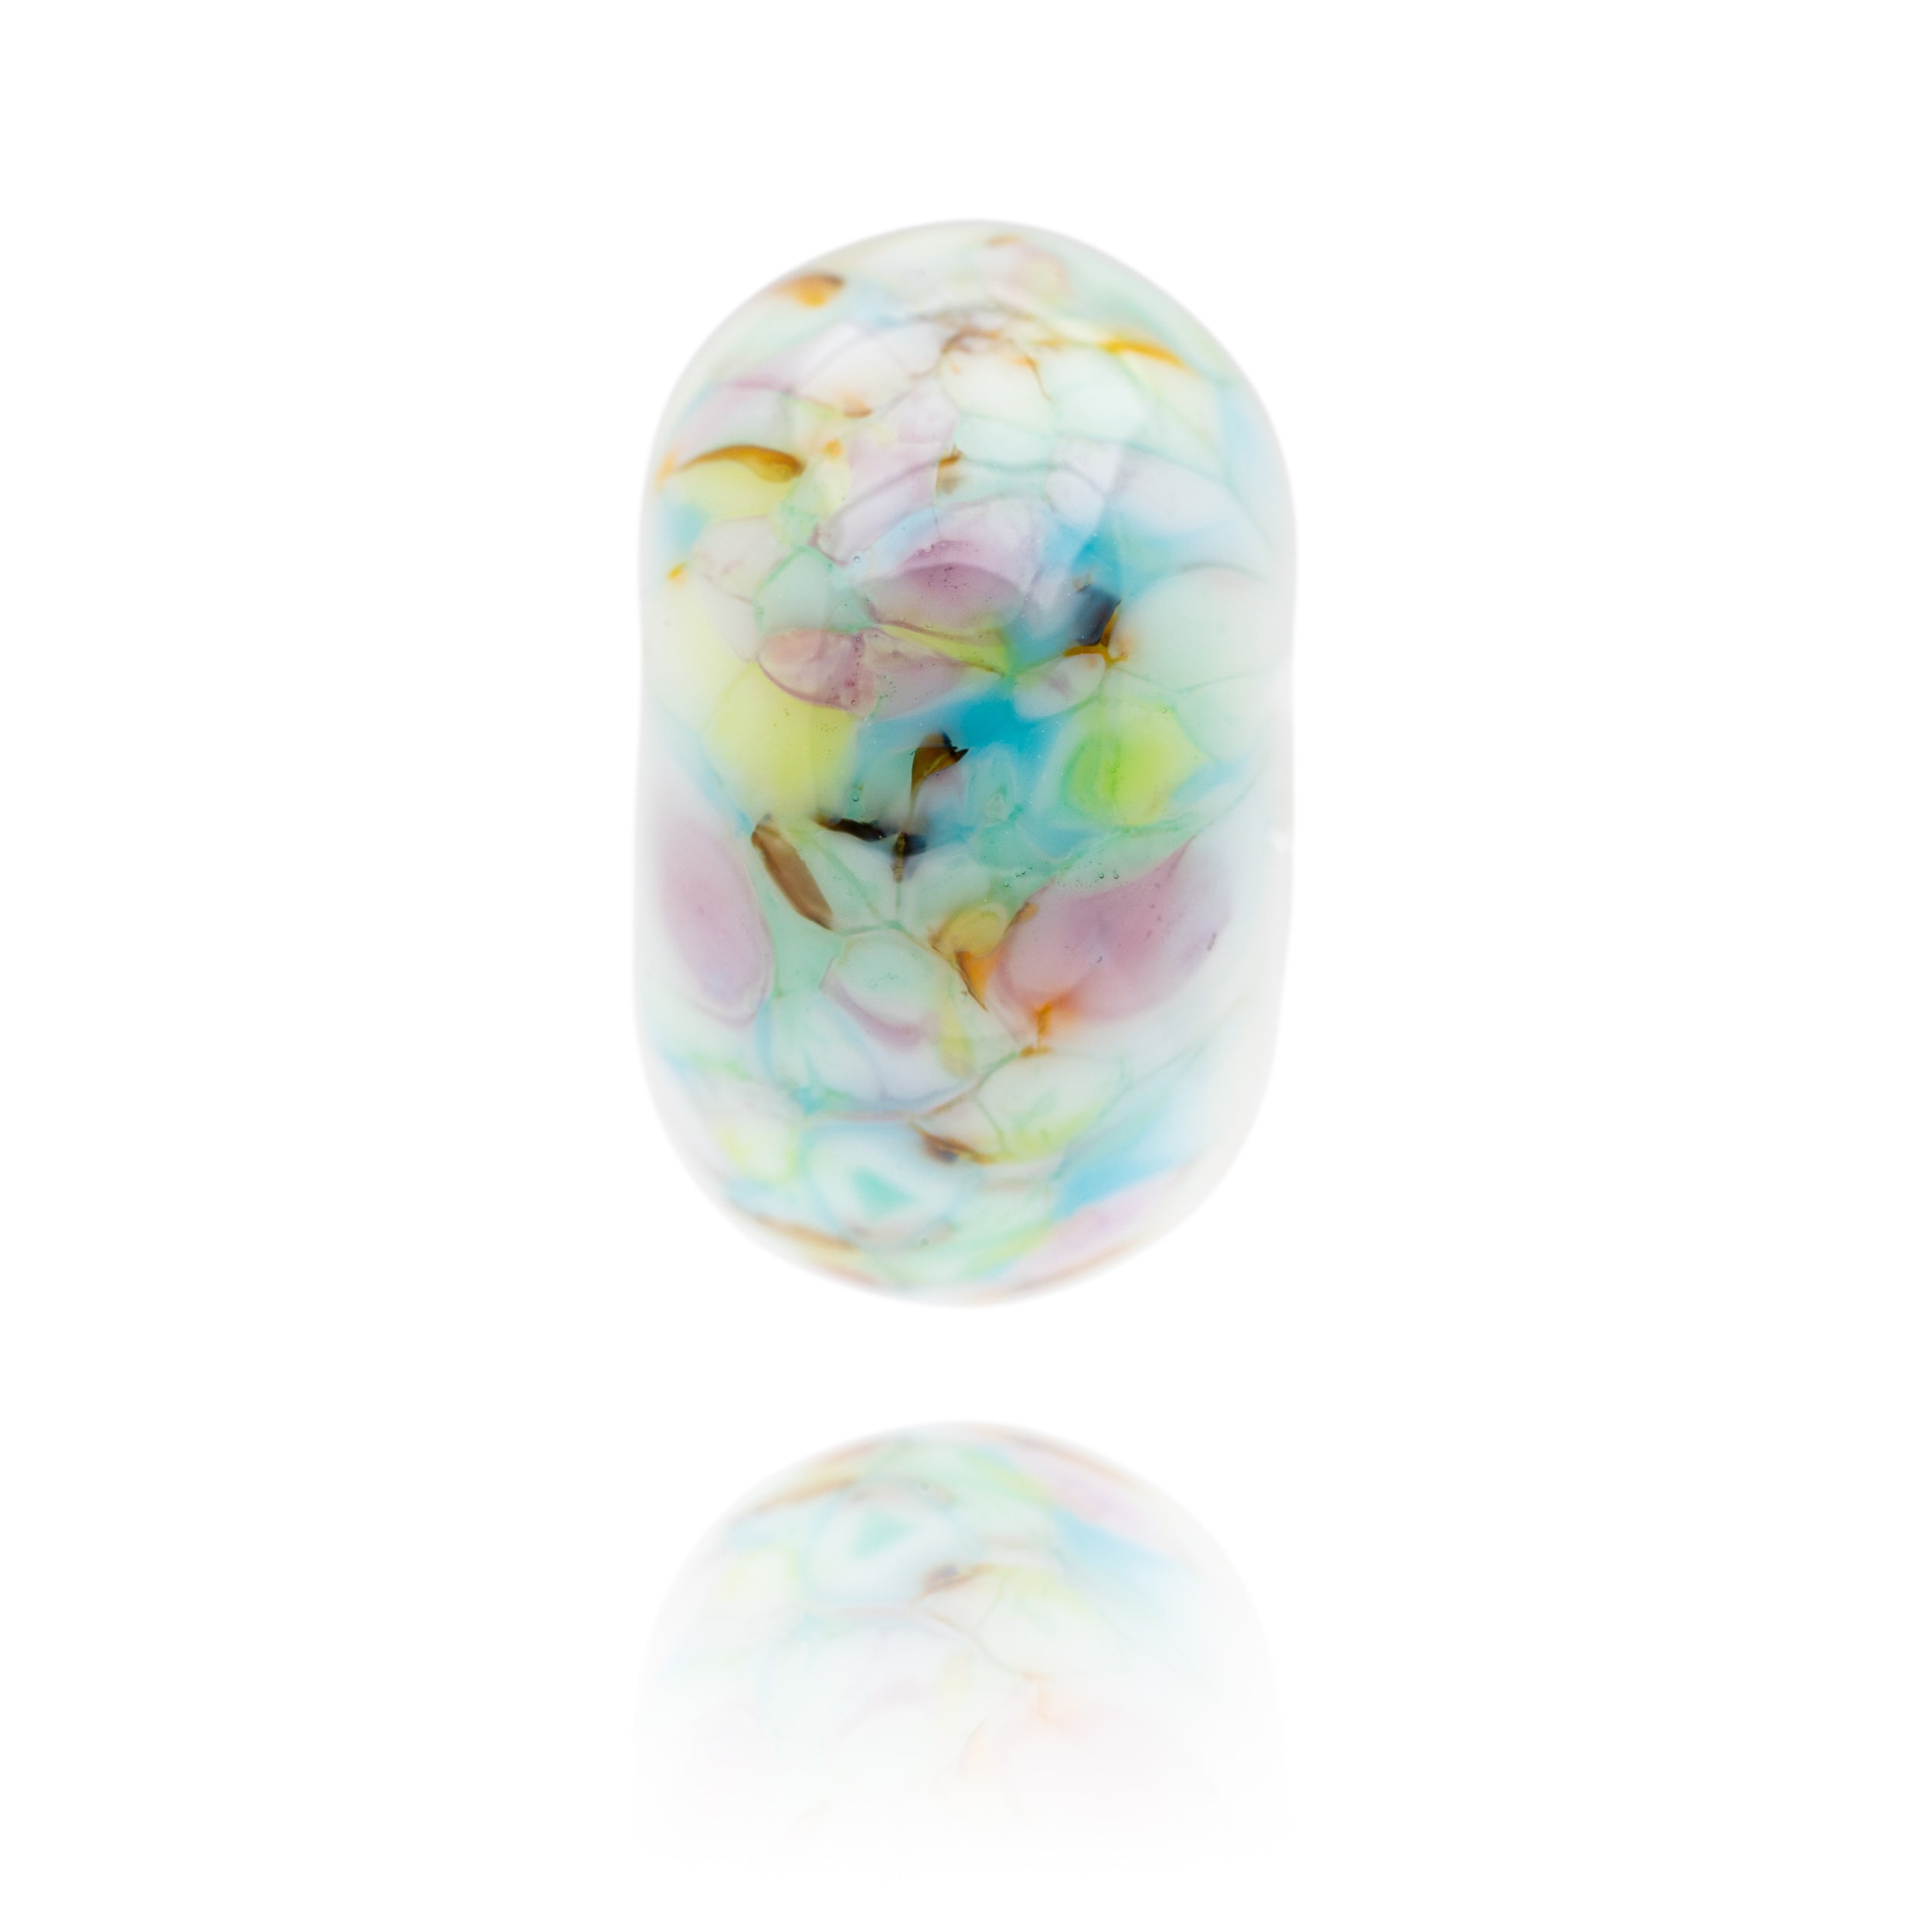 Colourful spring inspired glass bead.